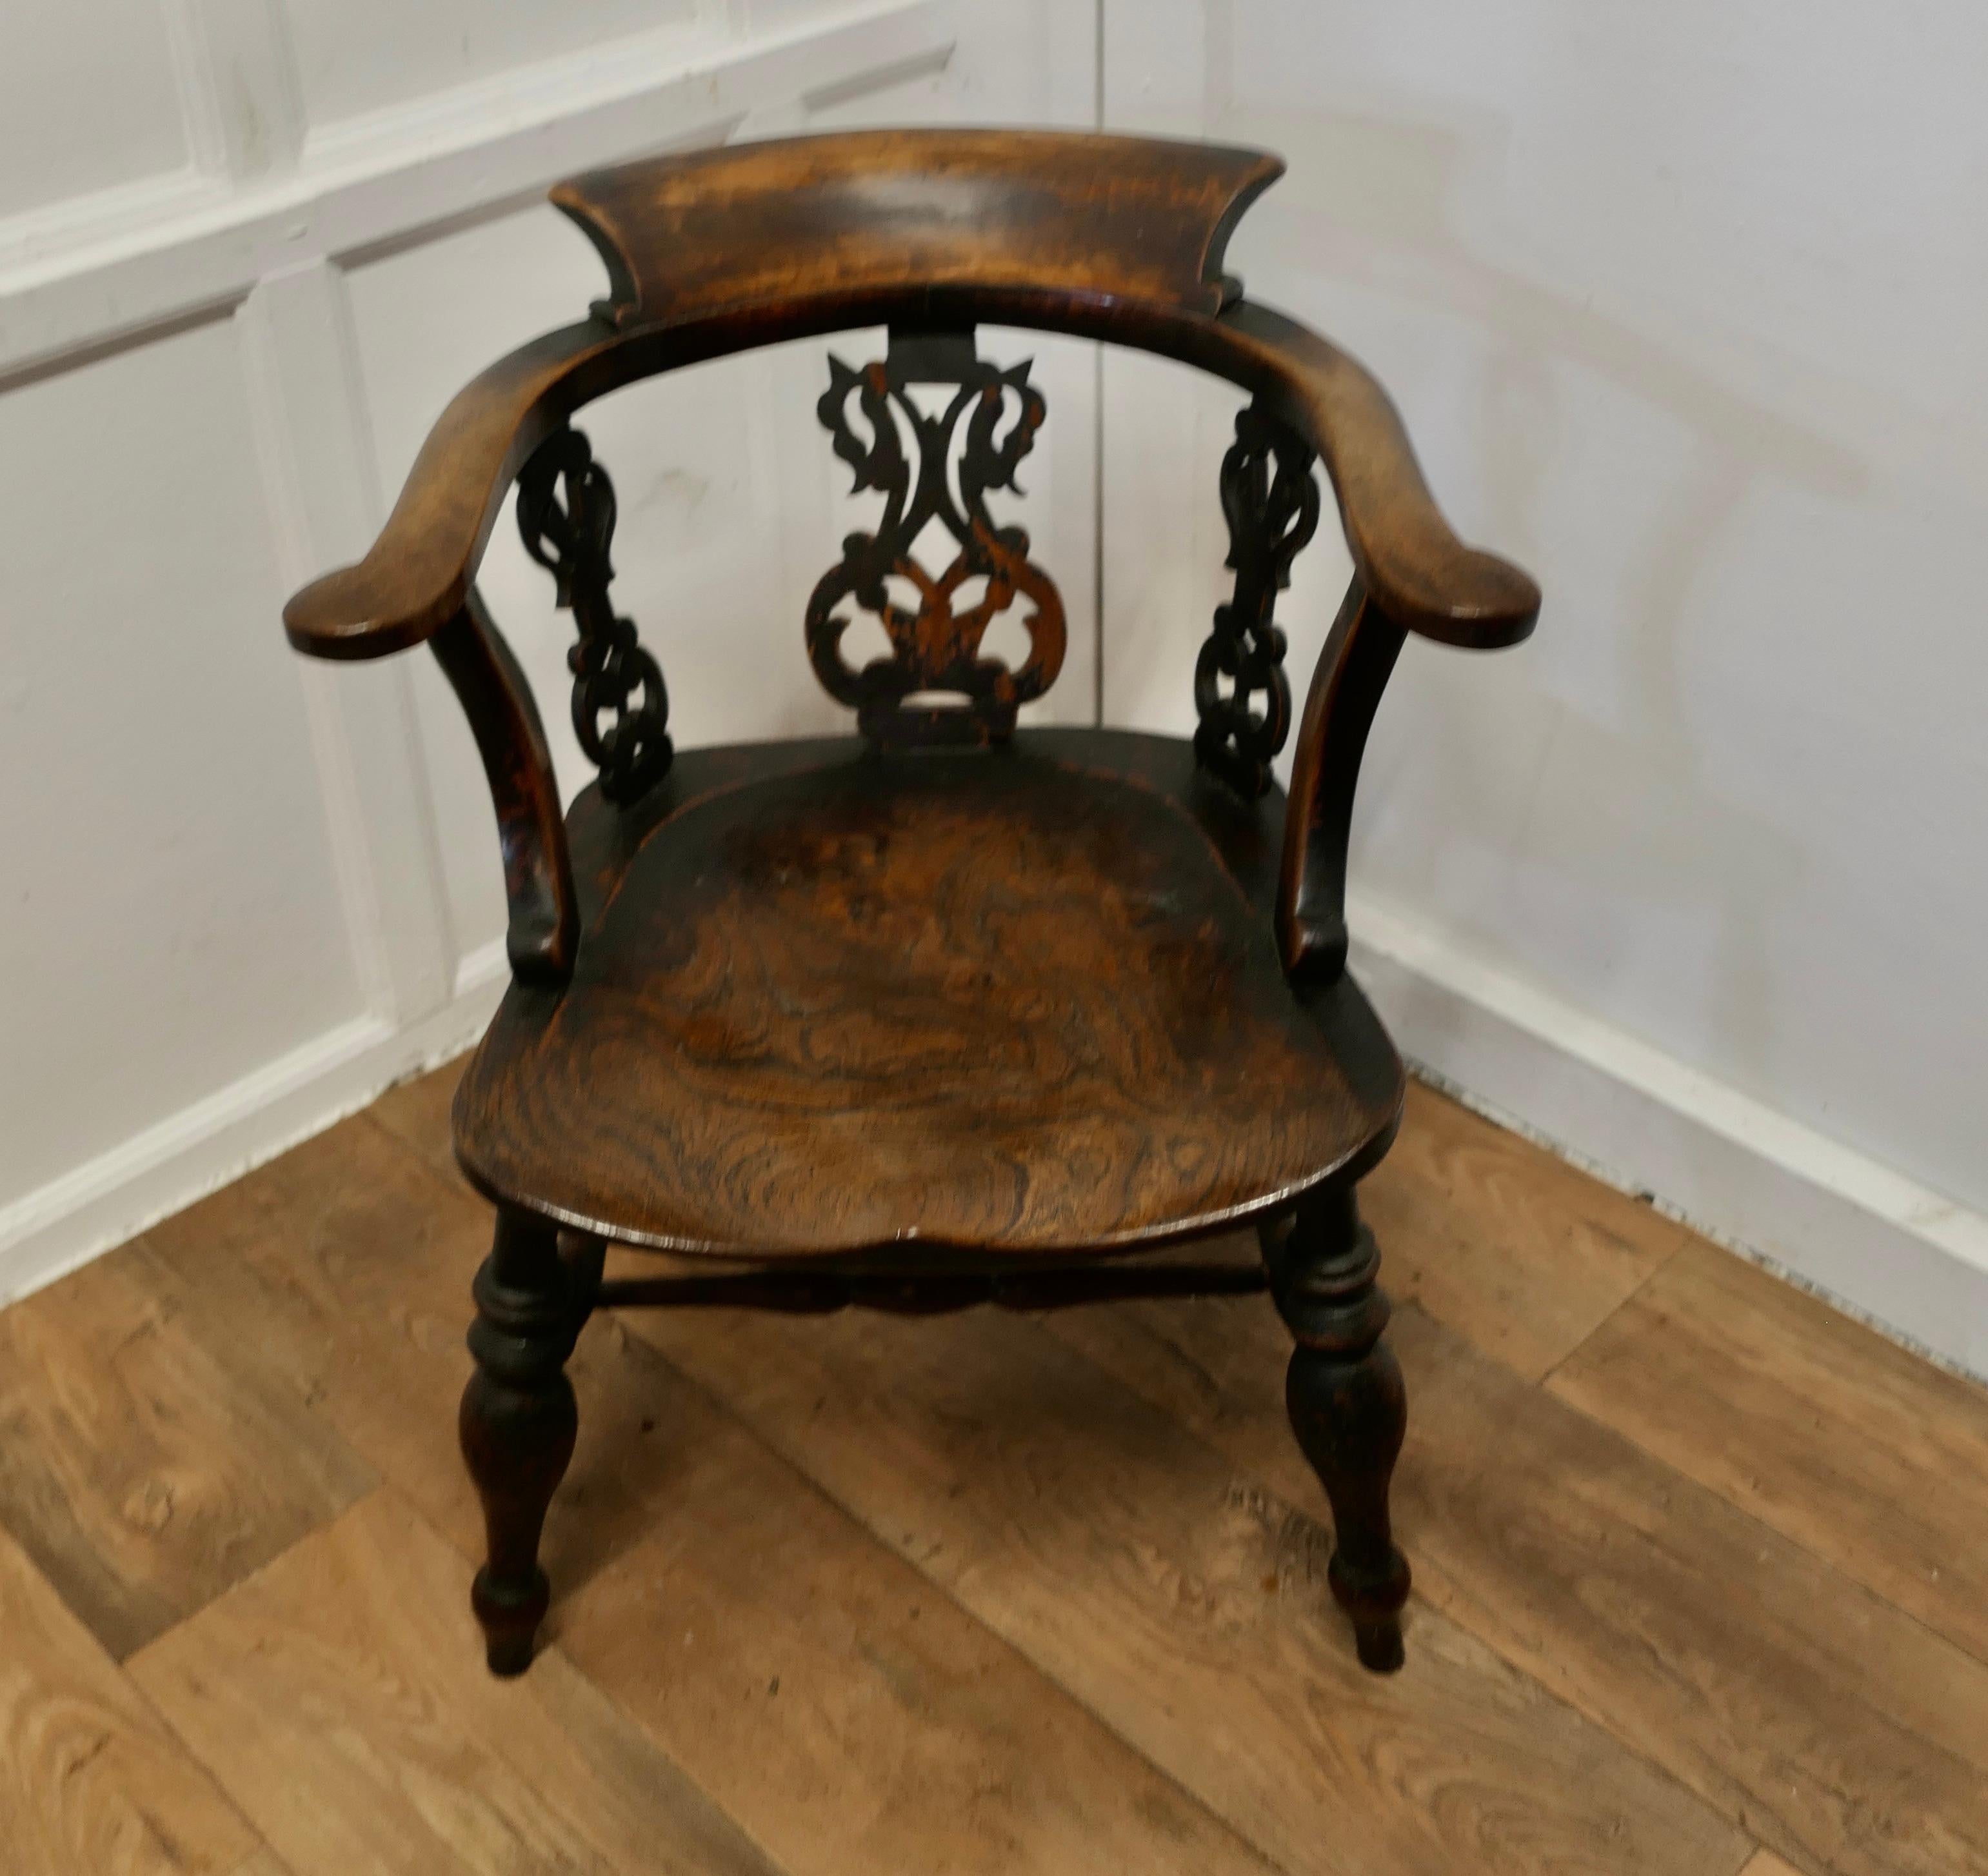 Fretwork Back Elm Windsor Desk Chair 

This style is known by many names Smokers Bow, Windsor Chair  or Captain’s Chair 

A good original English Elm Windsor Carver Chair, all in very good original condition with a natural patina.
The Chair has a